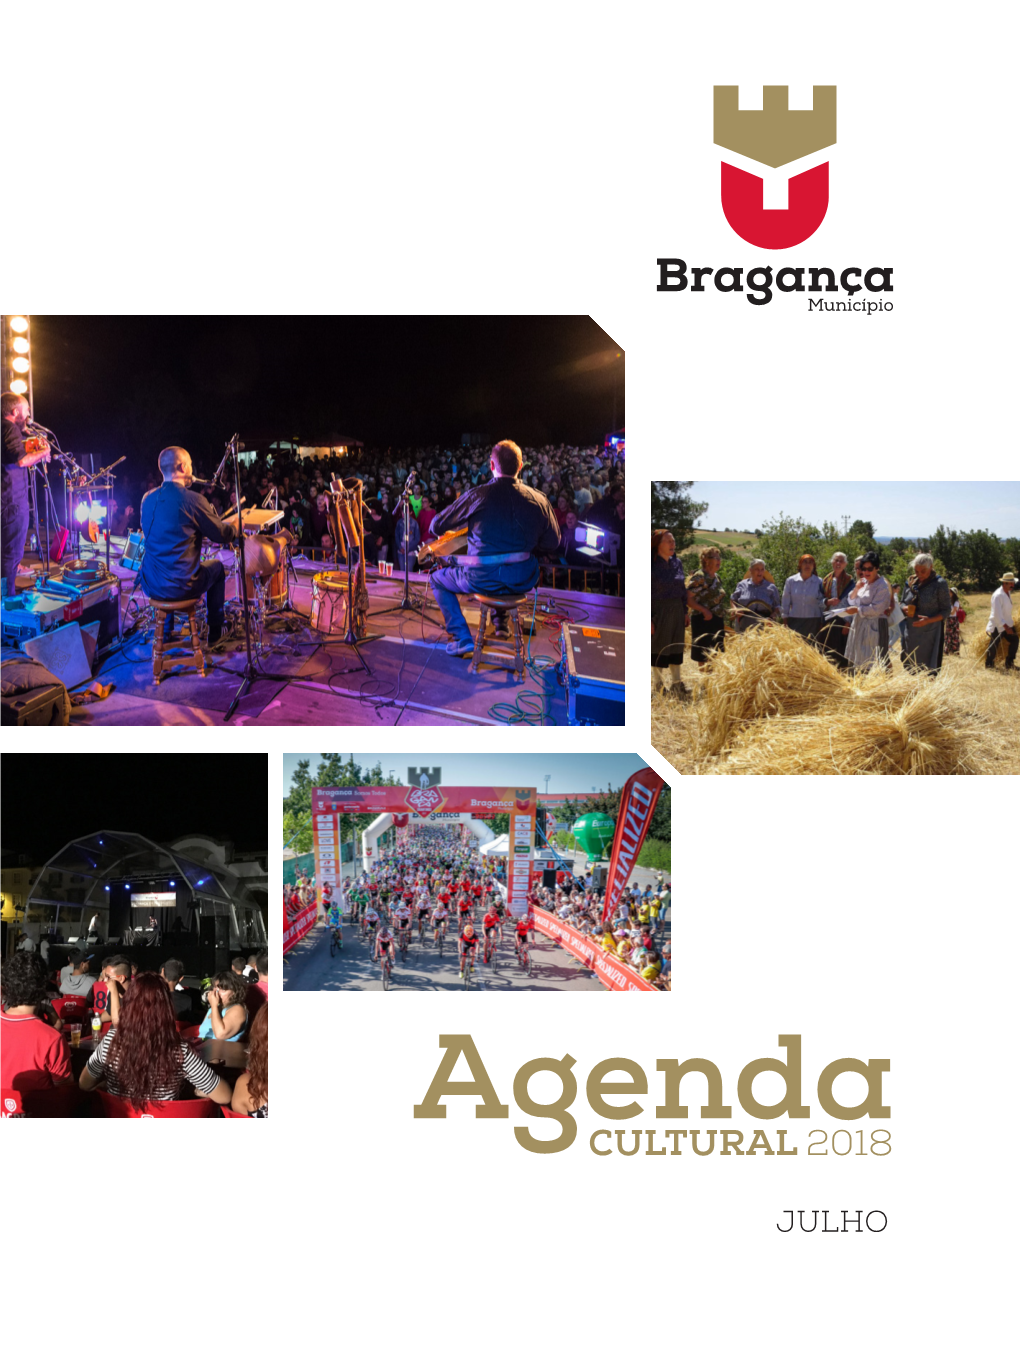 Agendacultural 2018